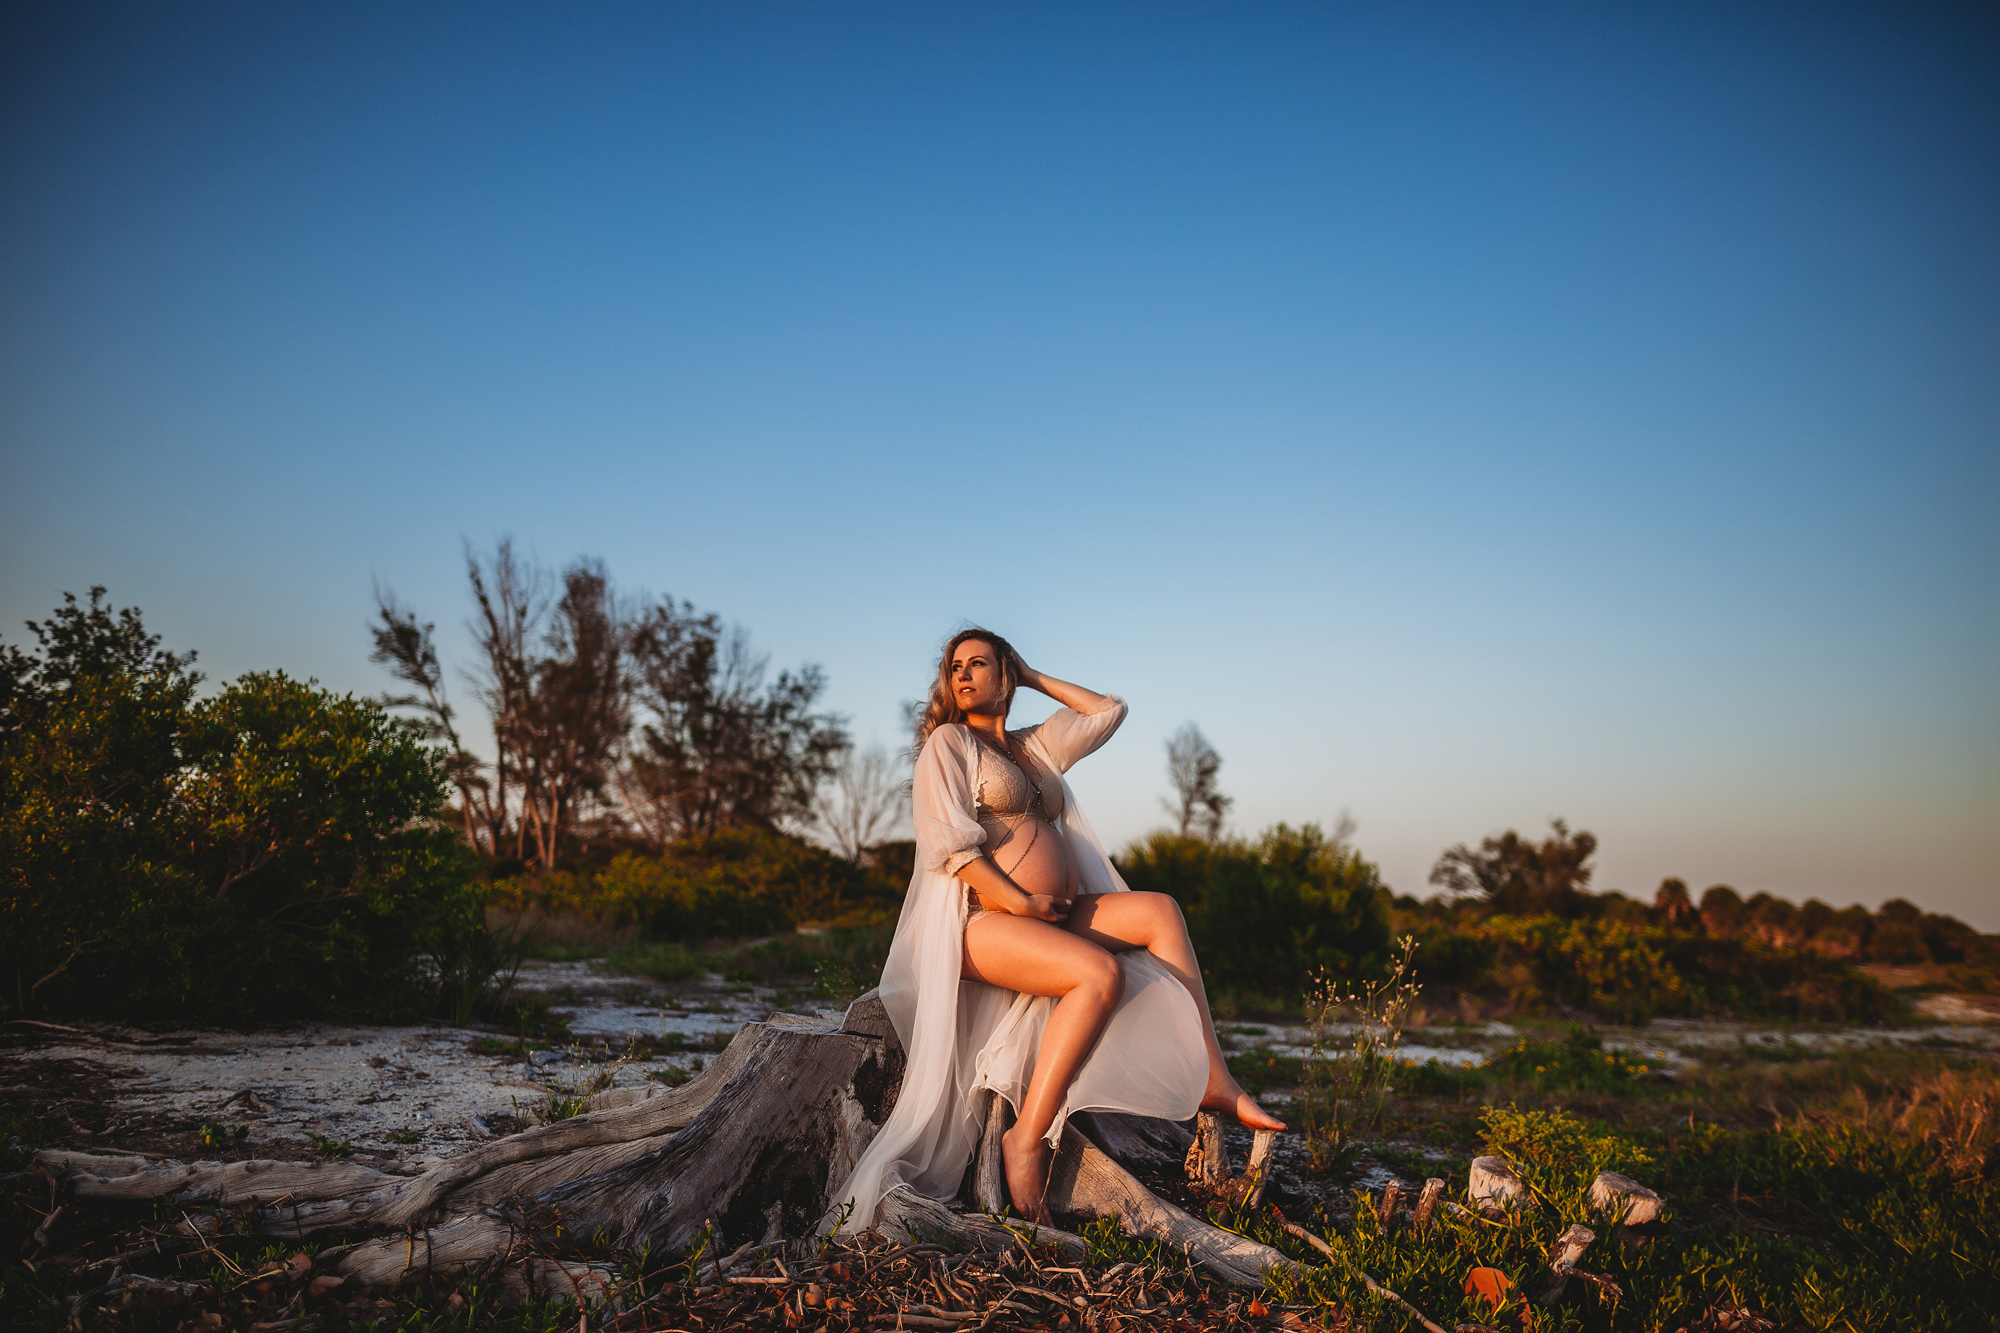 sexy maternity portraits by the water, st pete fl maternity portraits